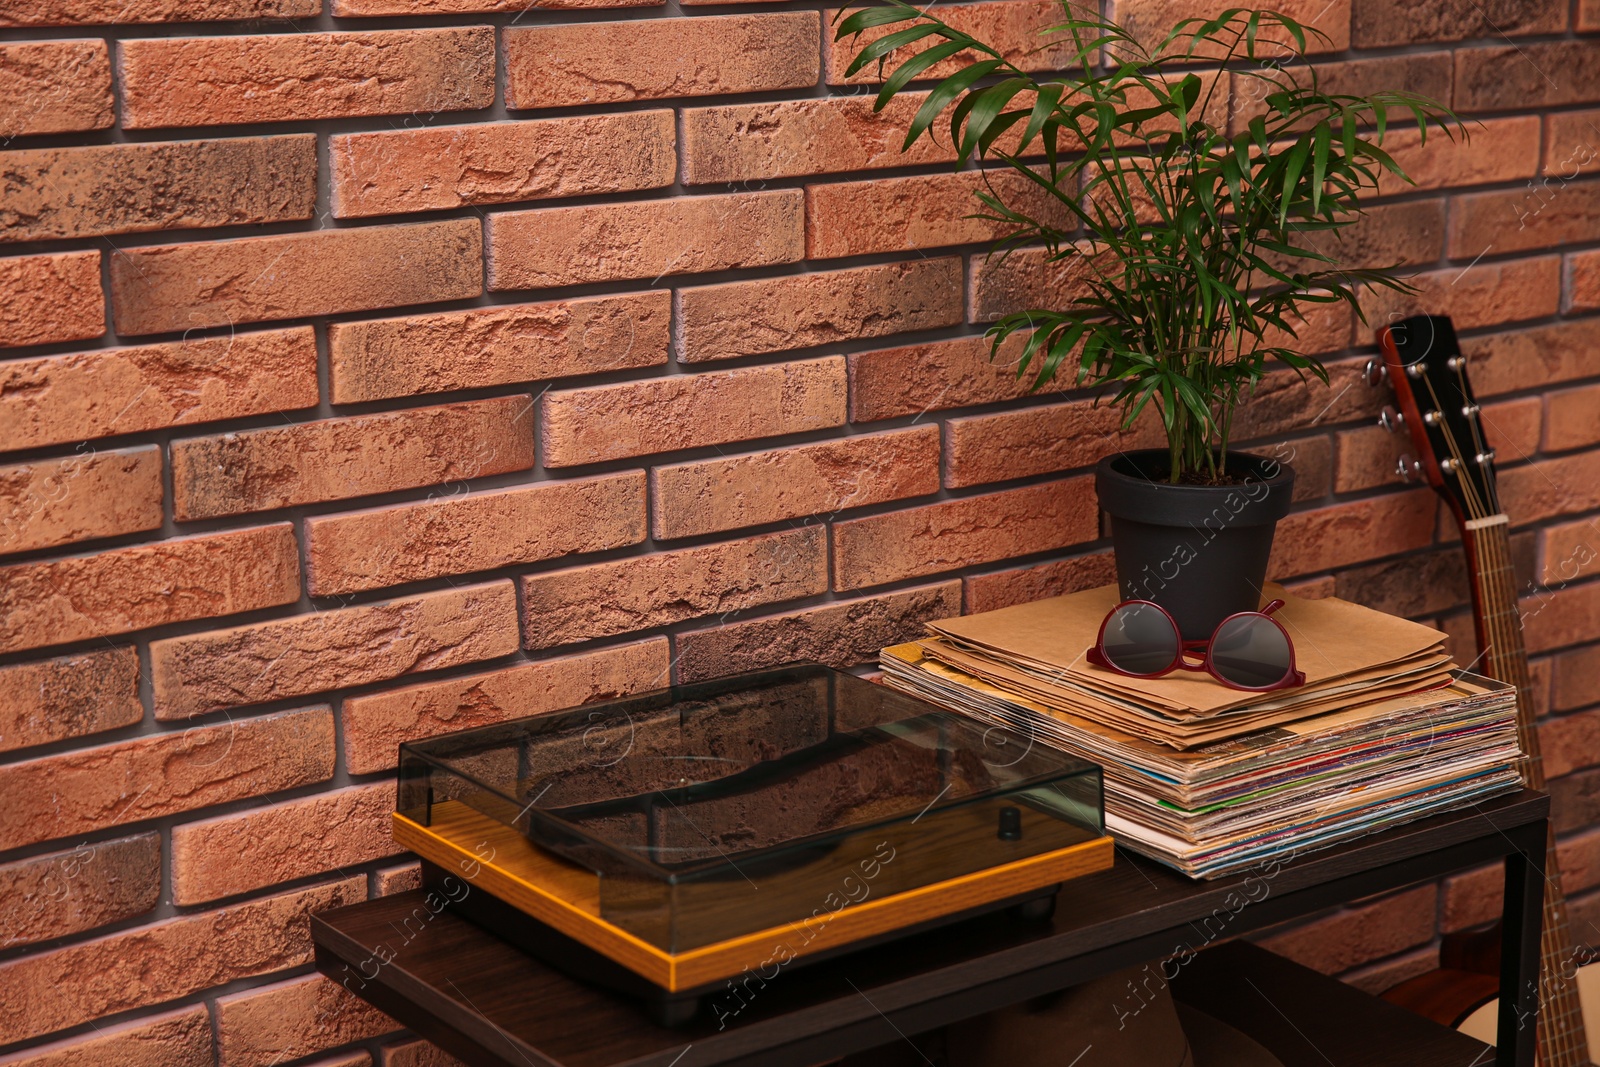 Photo of Stylish turntable and vinyl records on shelving unit near red brick wall